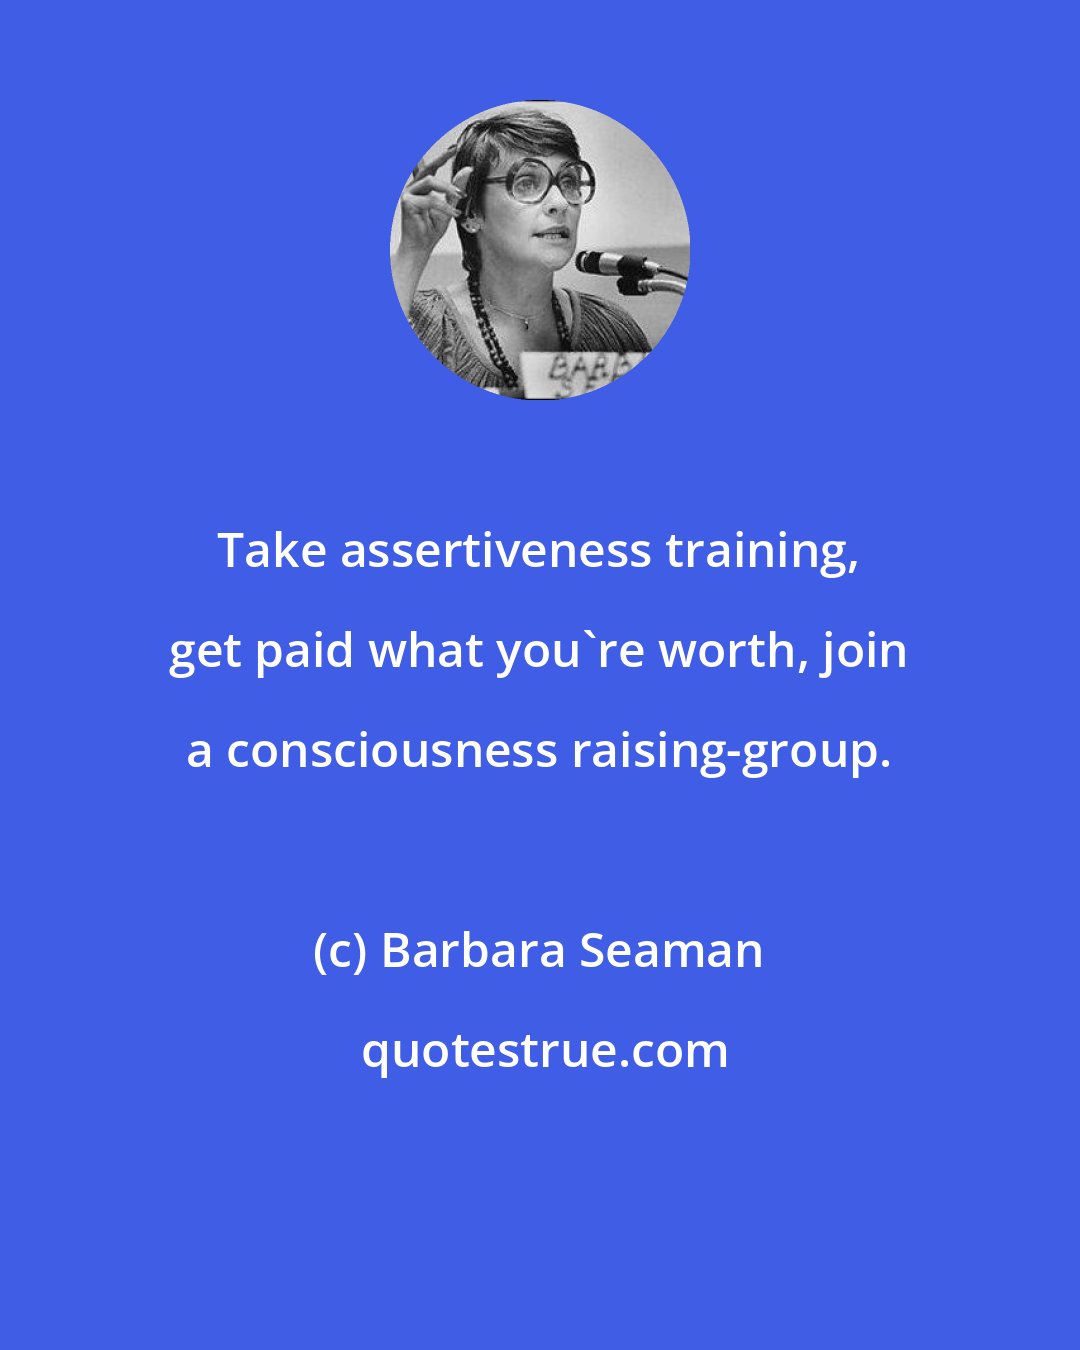 Barbara Seaman: Take assertiveness training, get paid what you're worth, join a consciousness raising-group.